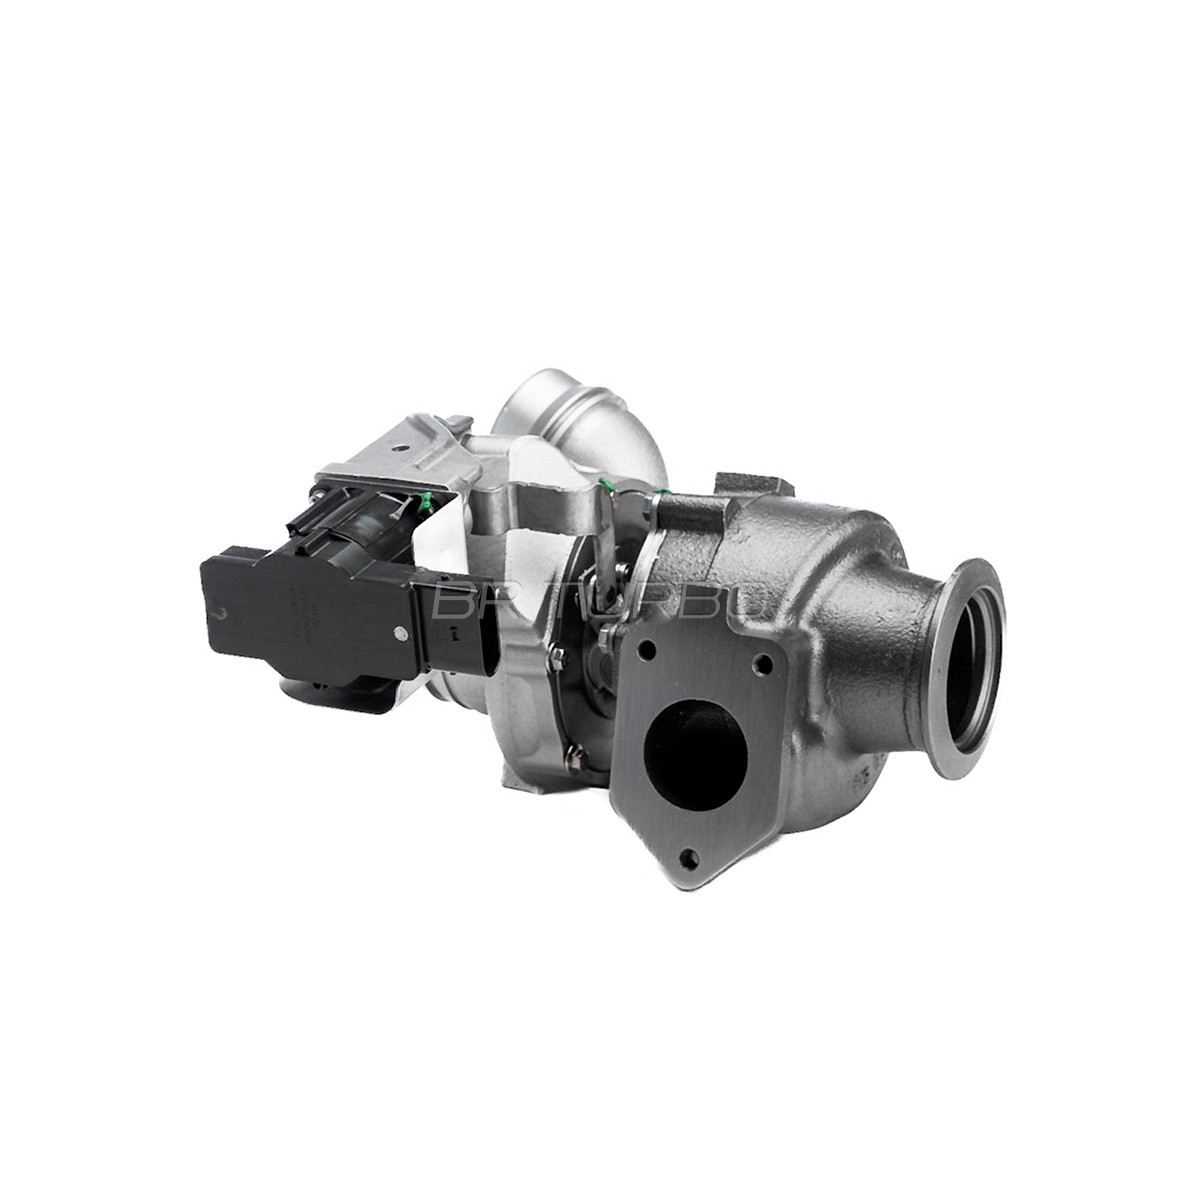 BR Turbo 4913505895RSM Turbo Turbo, with attachment material